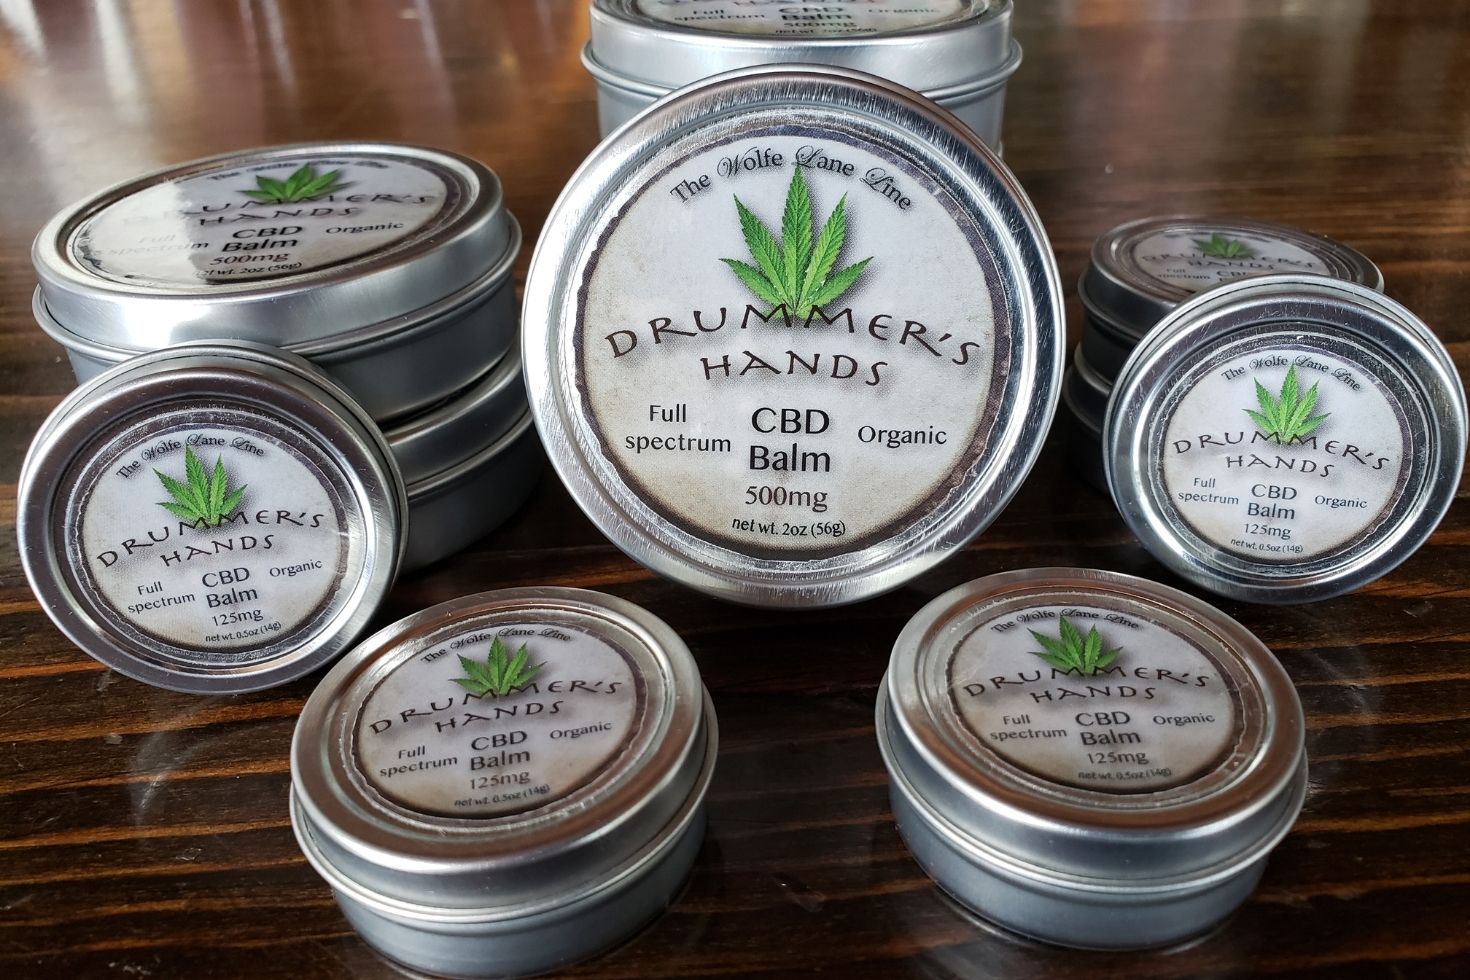 Multiple tin cans of Drummer’s Hands CBD Balm